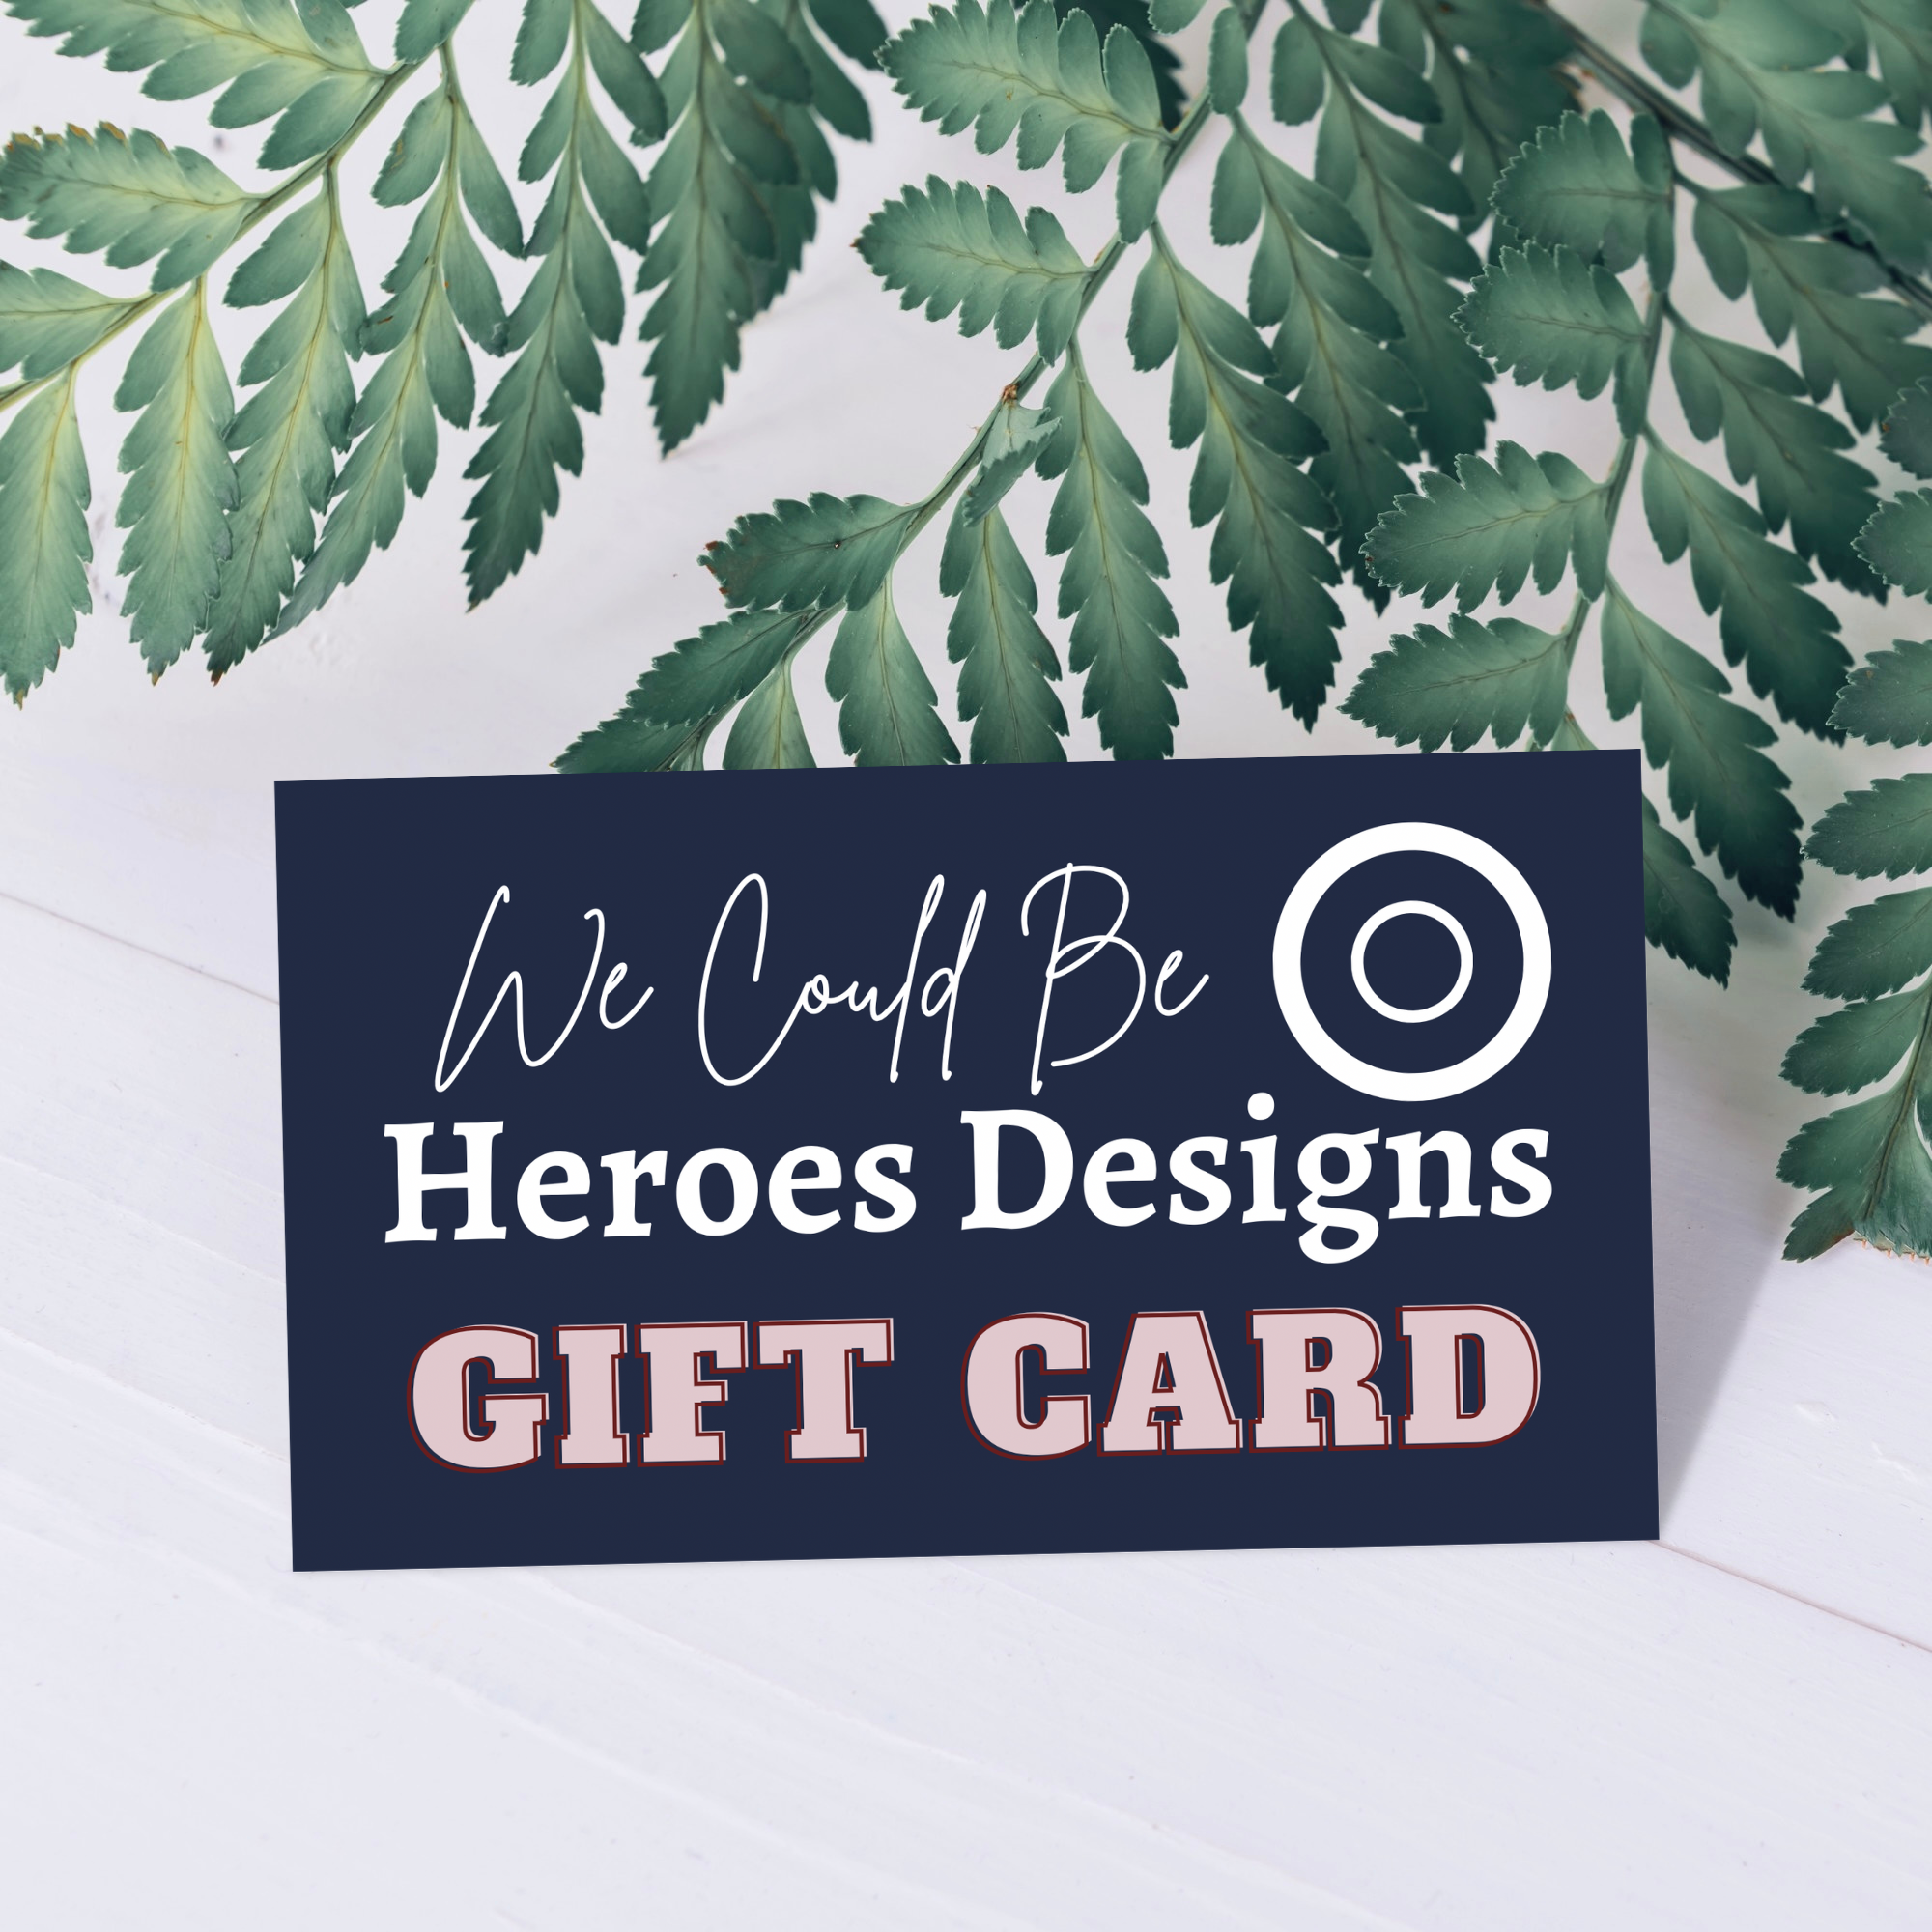 Digital We Could Be Heroes Designs Teen Wolf, Agents of S.H.I.E.L.D., Marvel, and Outer Banks Gift Card